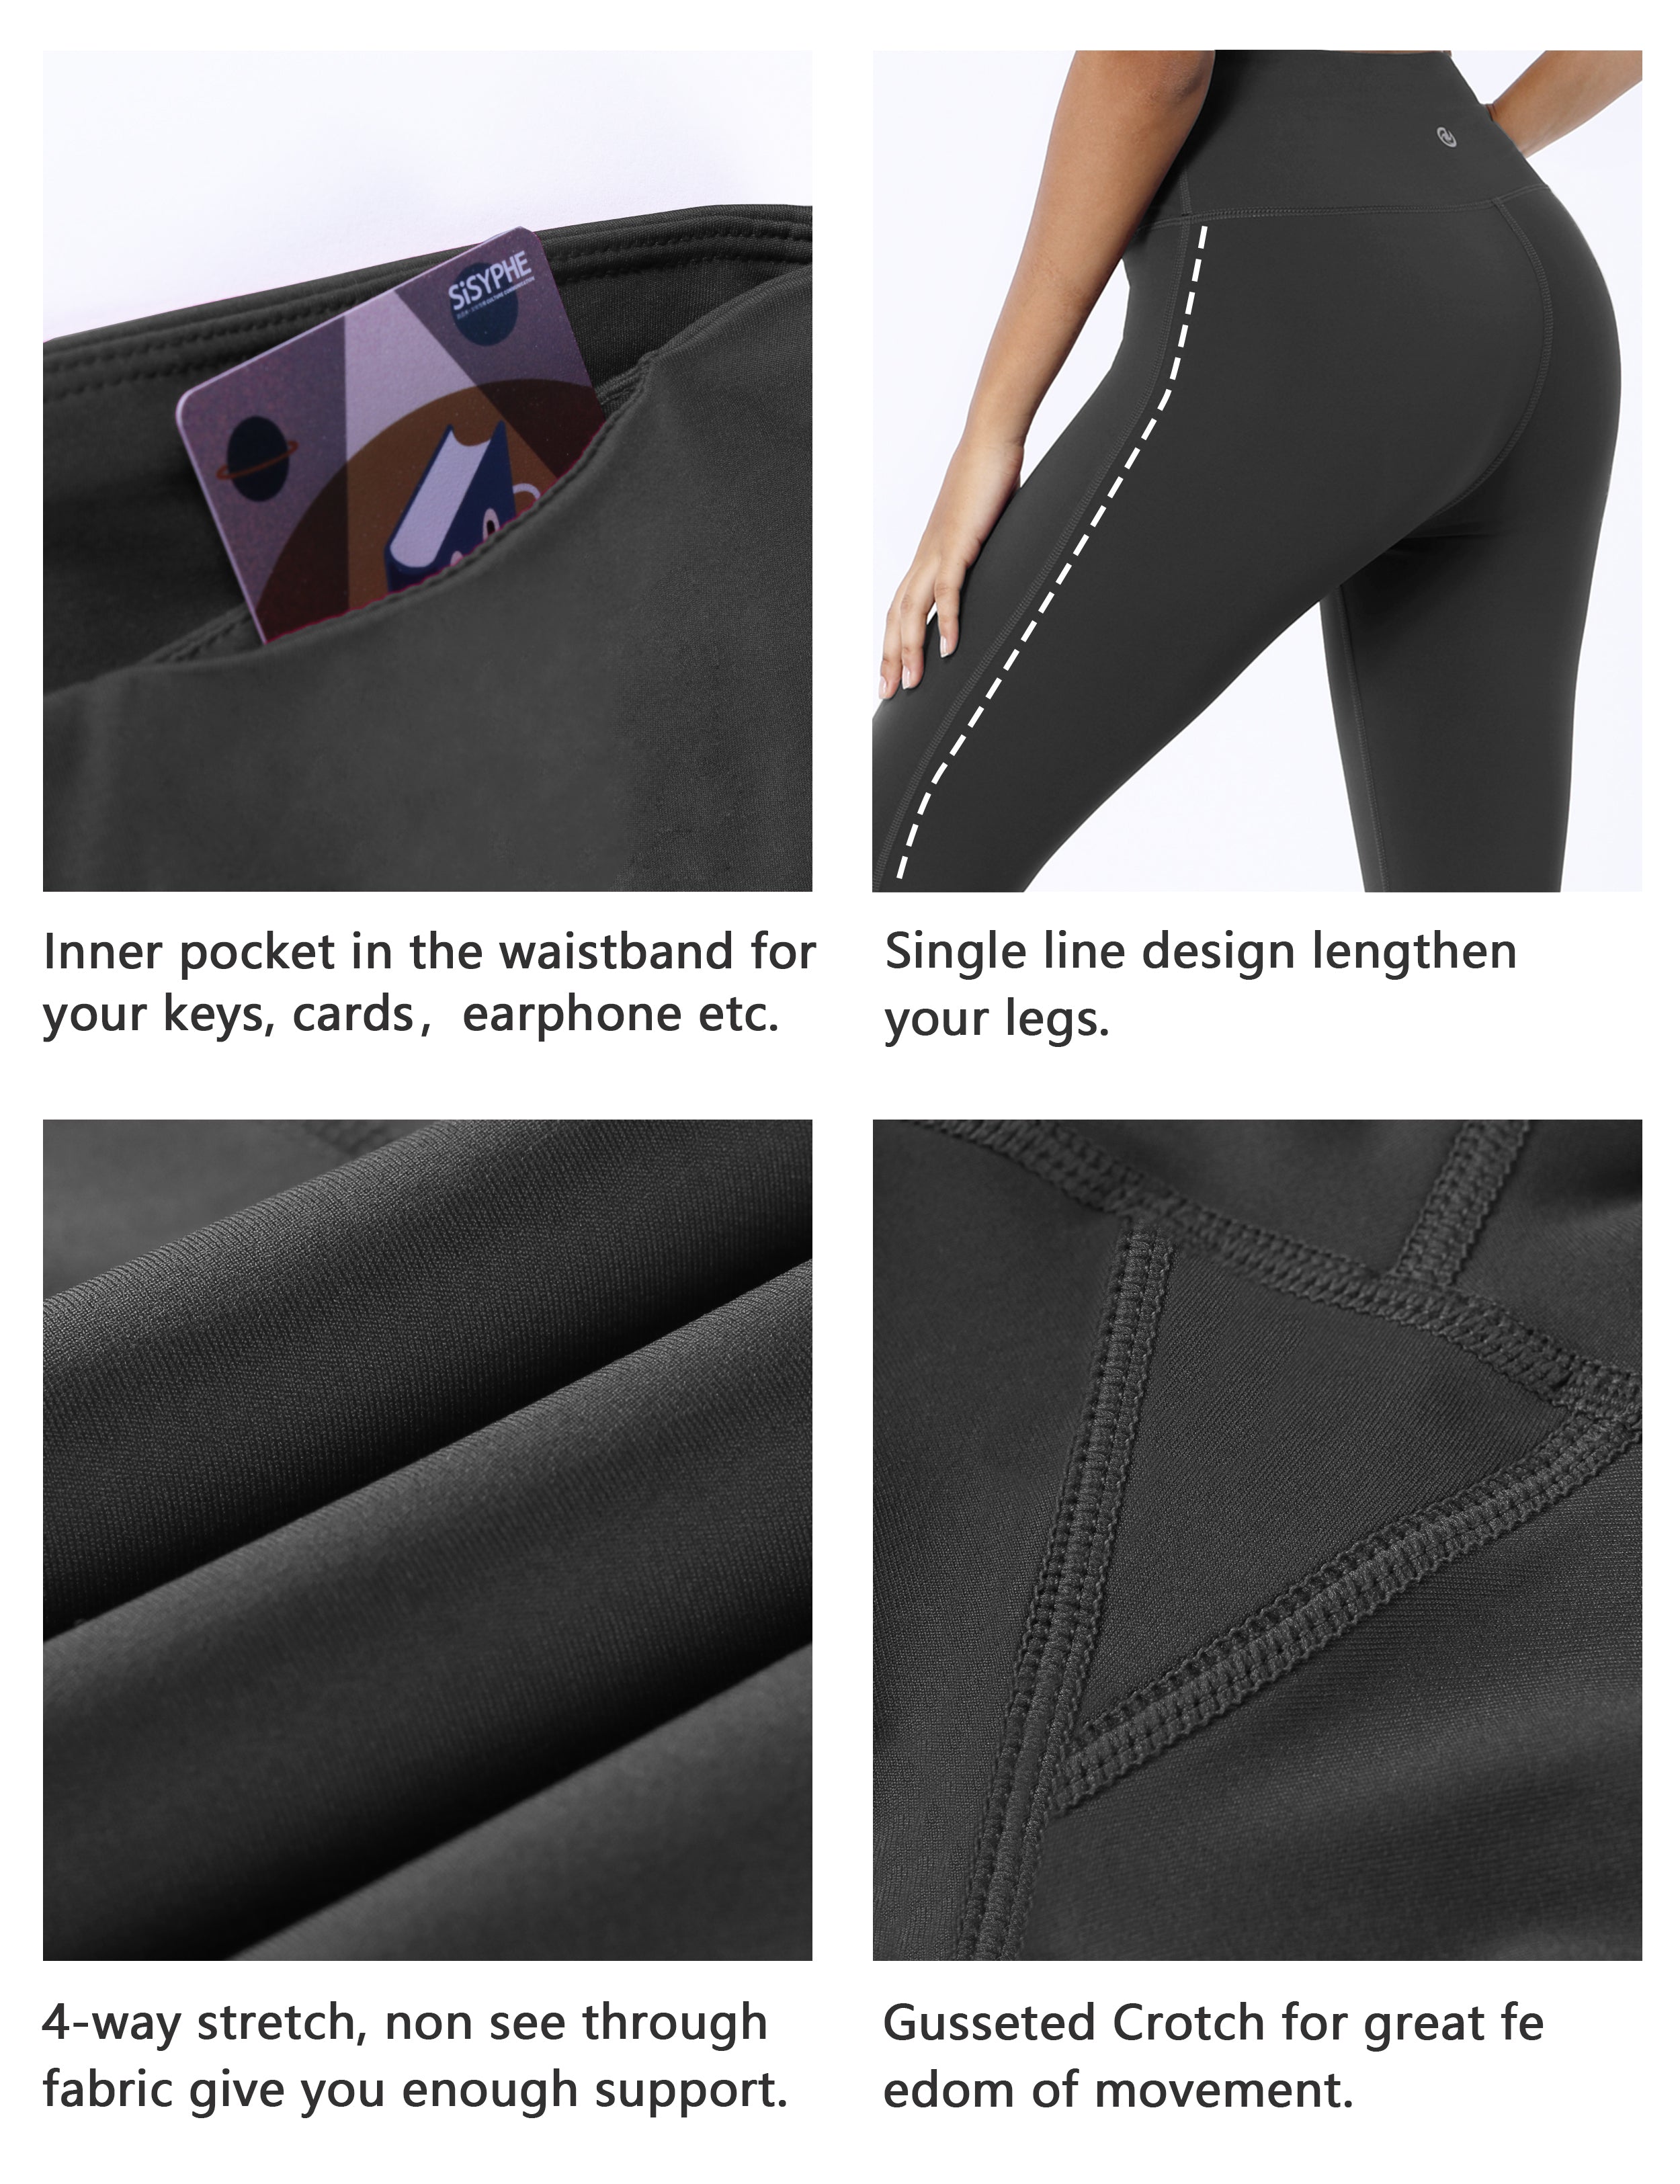 High Waist Side Line Yoga Pants shadowcharcoal Side Line is Make Your Legs Look Longer and Thinner 75%Nylon/25%Spandex Fabric doesn't attract lint easily 4-way stretch No see-through Moisture-wicking Tummy control Inner pocket Two lengths